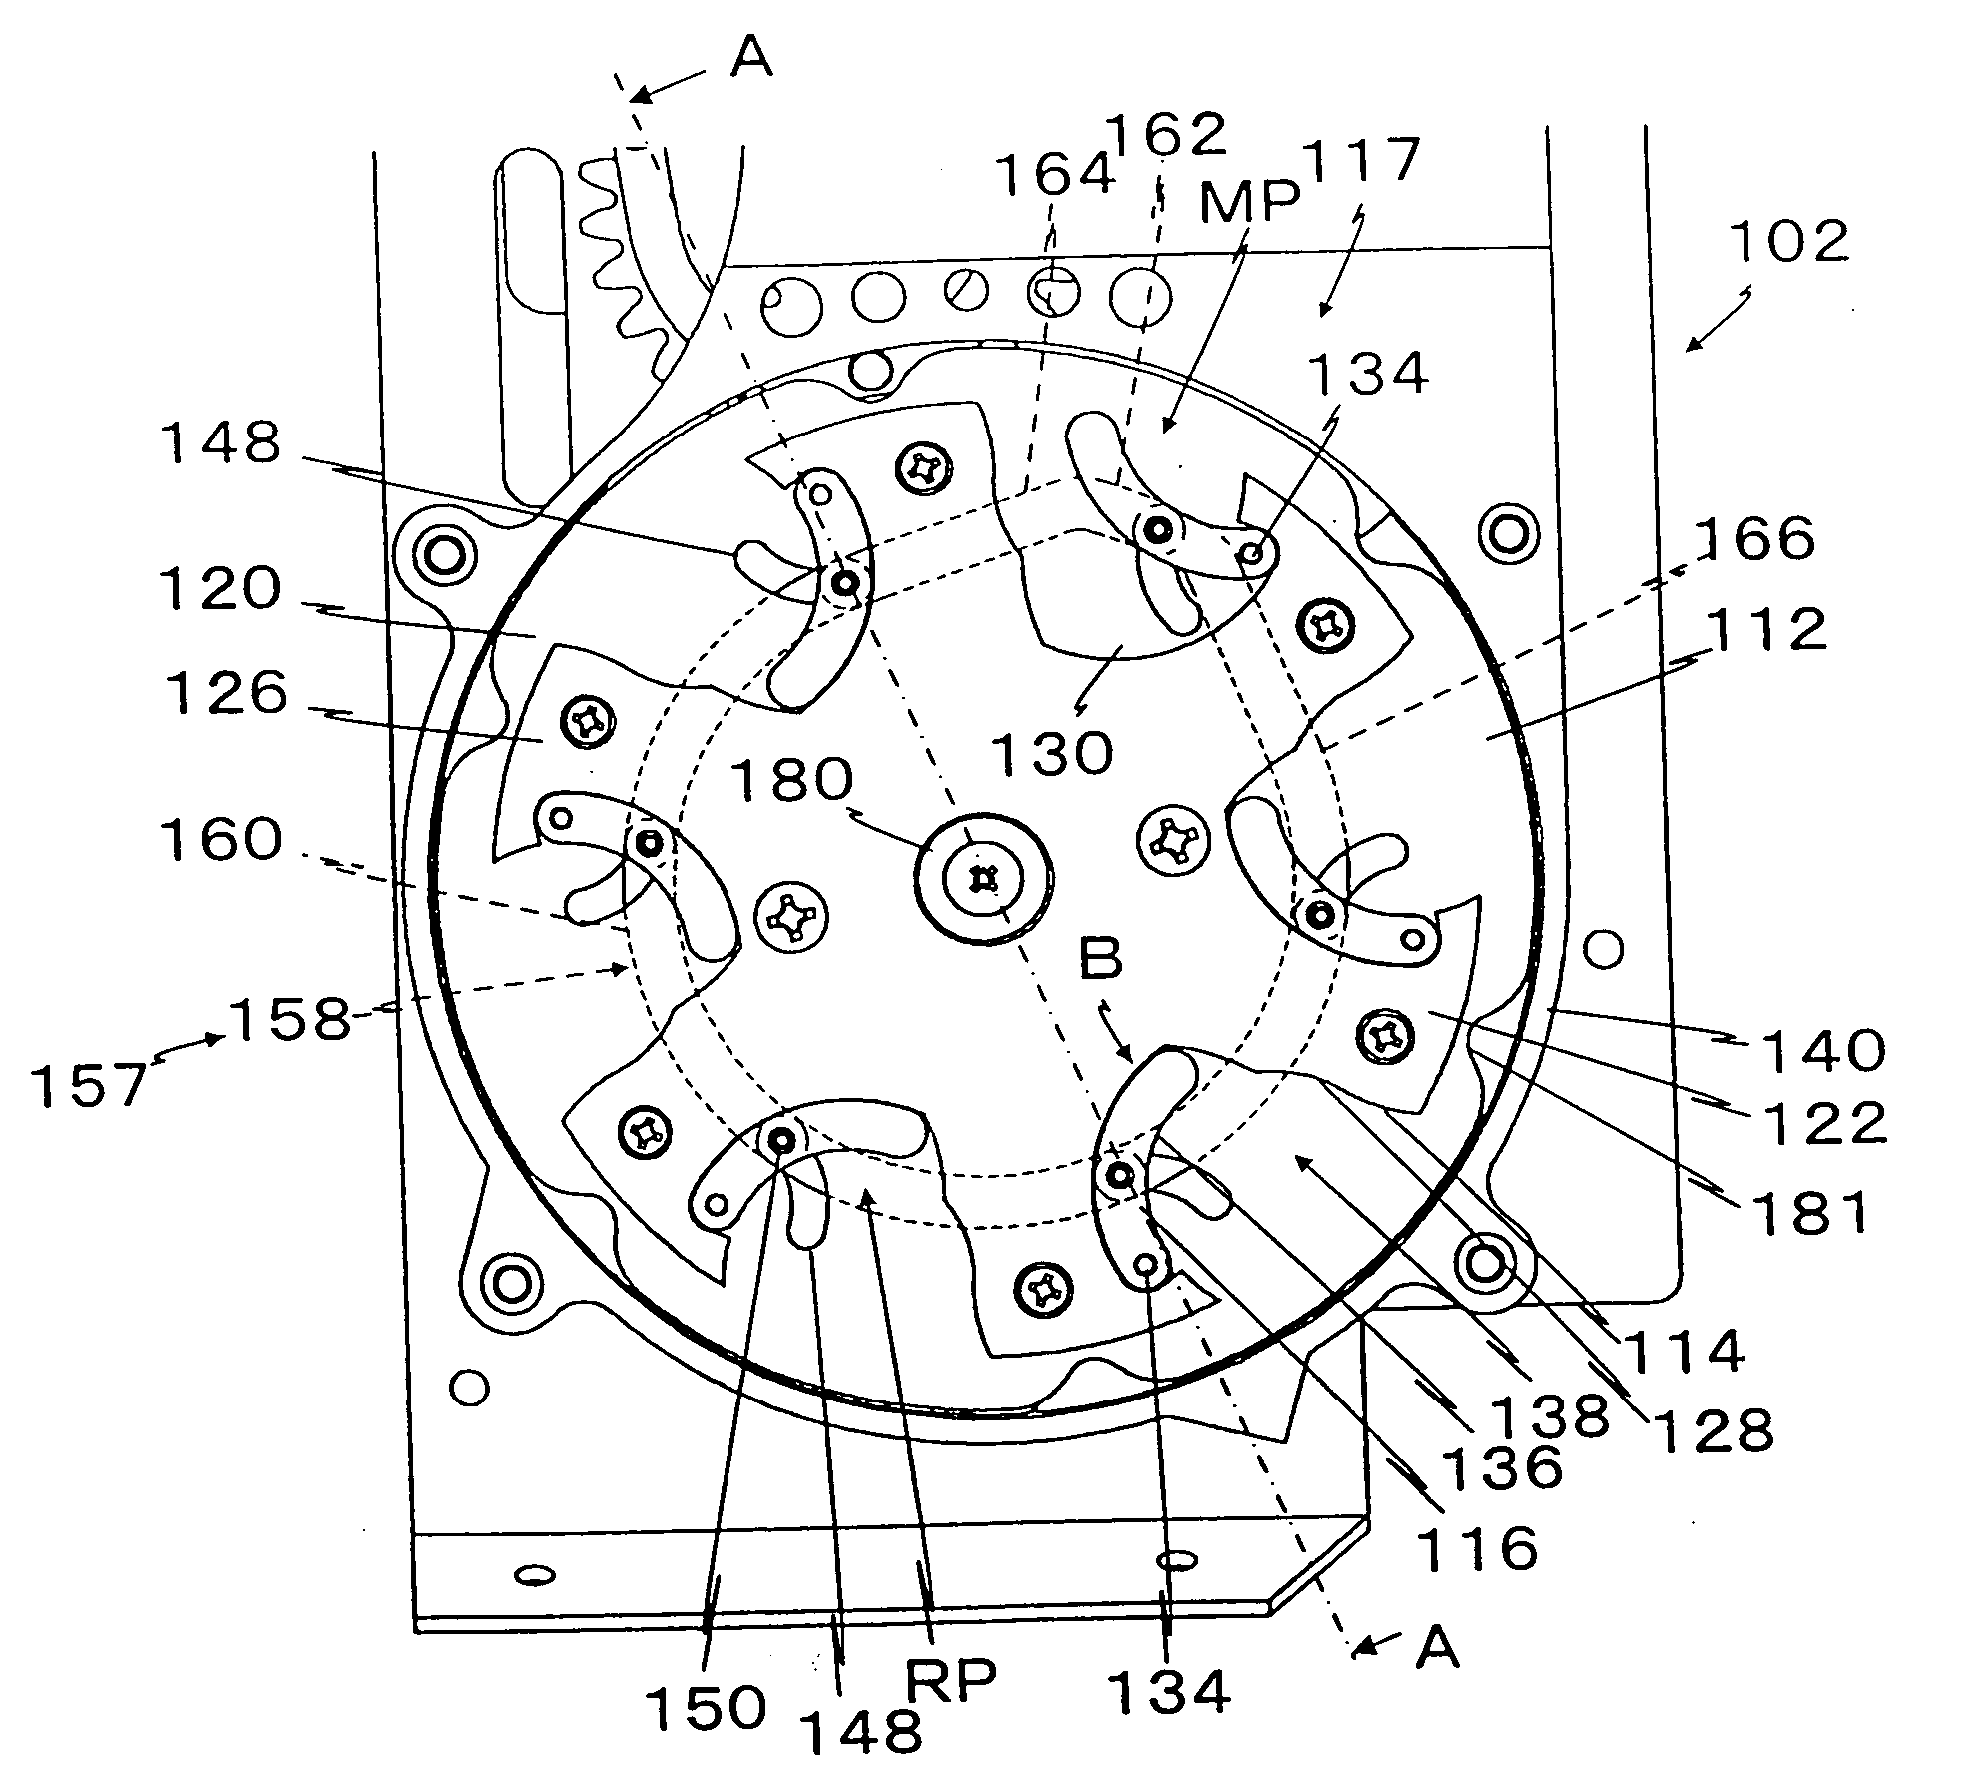 Coin delivery device and separator device for a coin processing apparatus